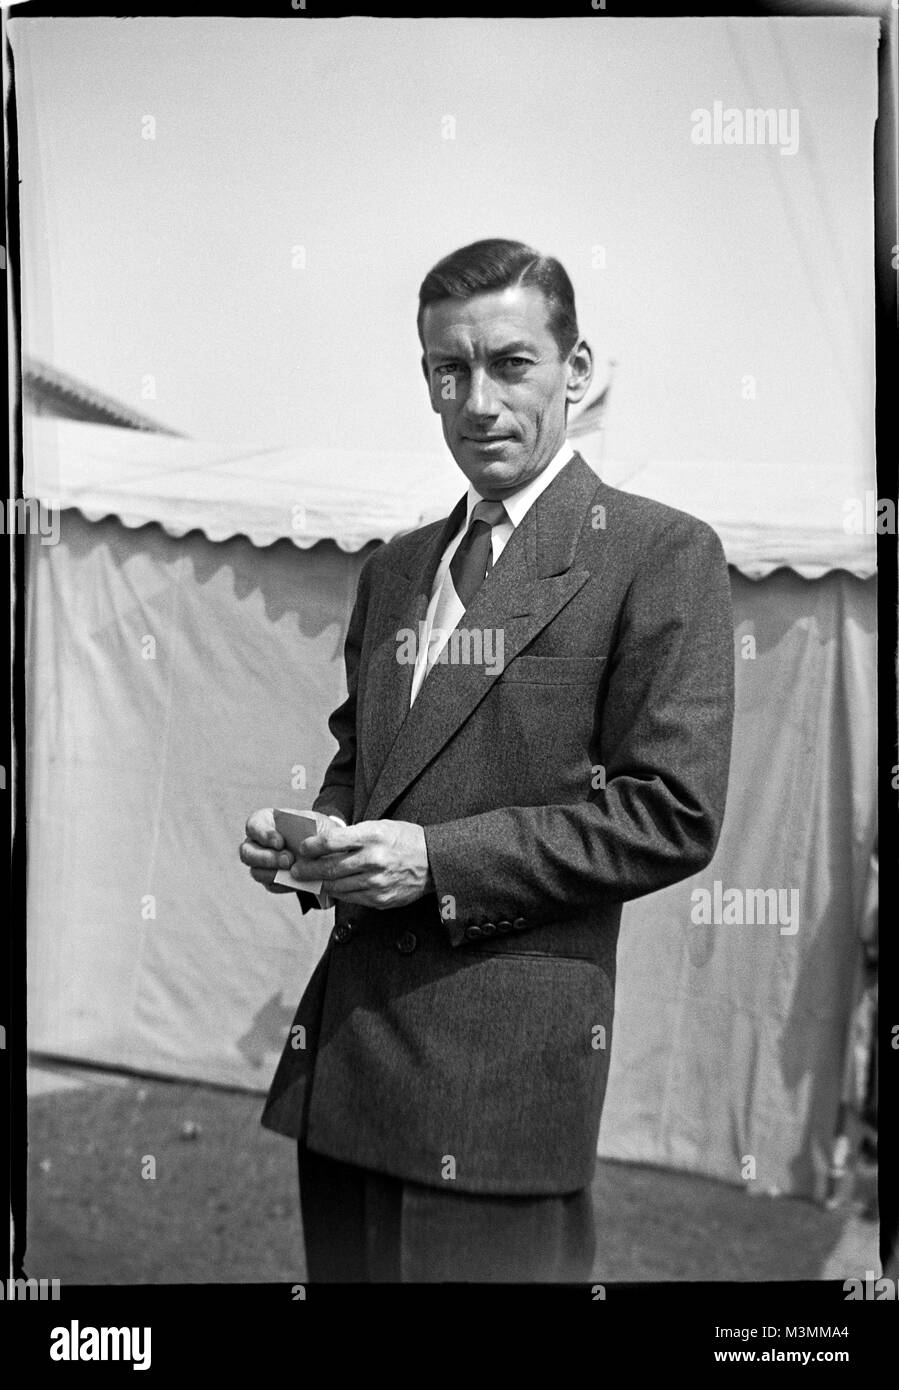 Hoagland Howard 'Hoagy' Carmichael, circa 1946. Composer, pianist, singer, actor, and bandleader. Best known for his songs, Stardust, Georgia On My Mind, & Heart and Soul. Original camera negative. Stock Photo